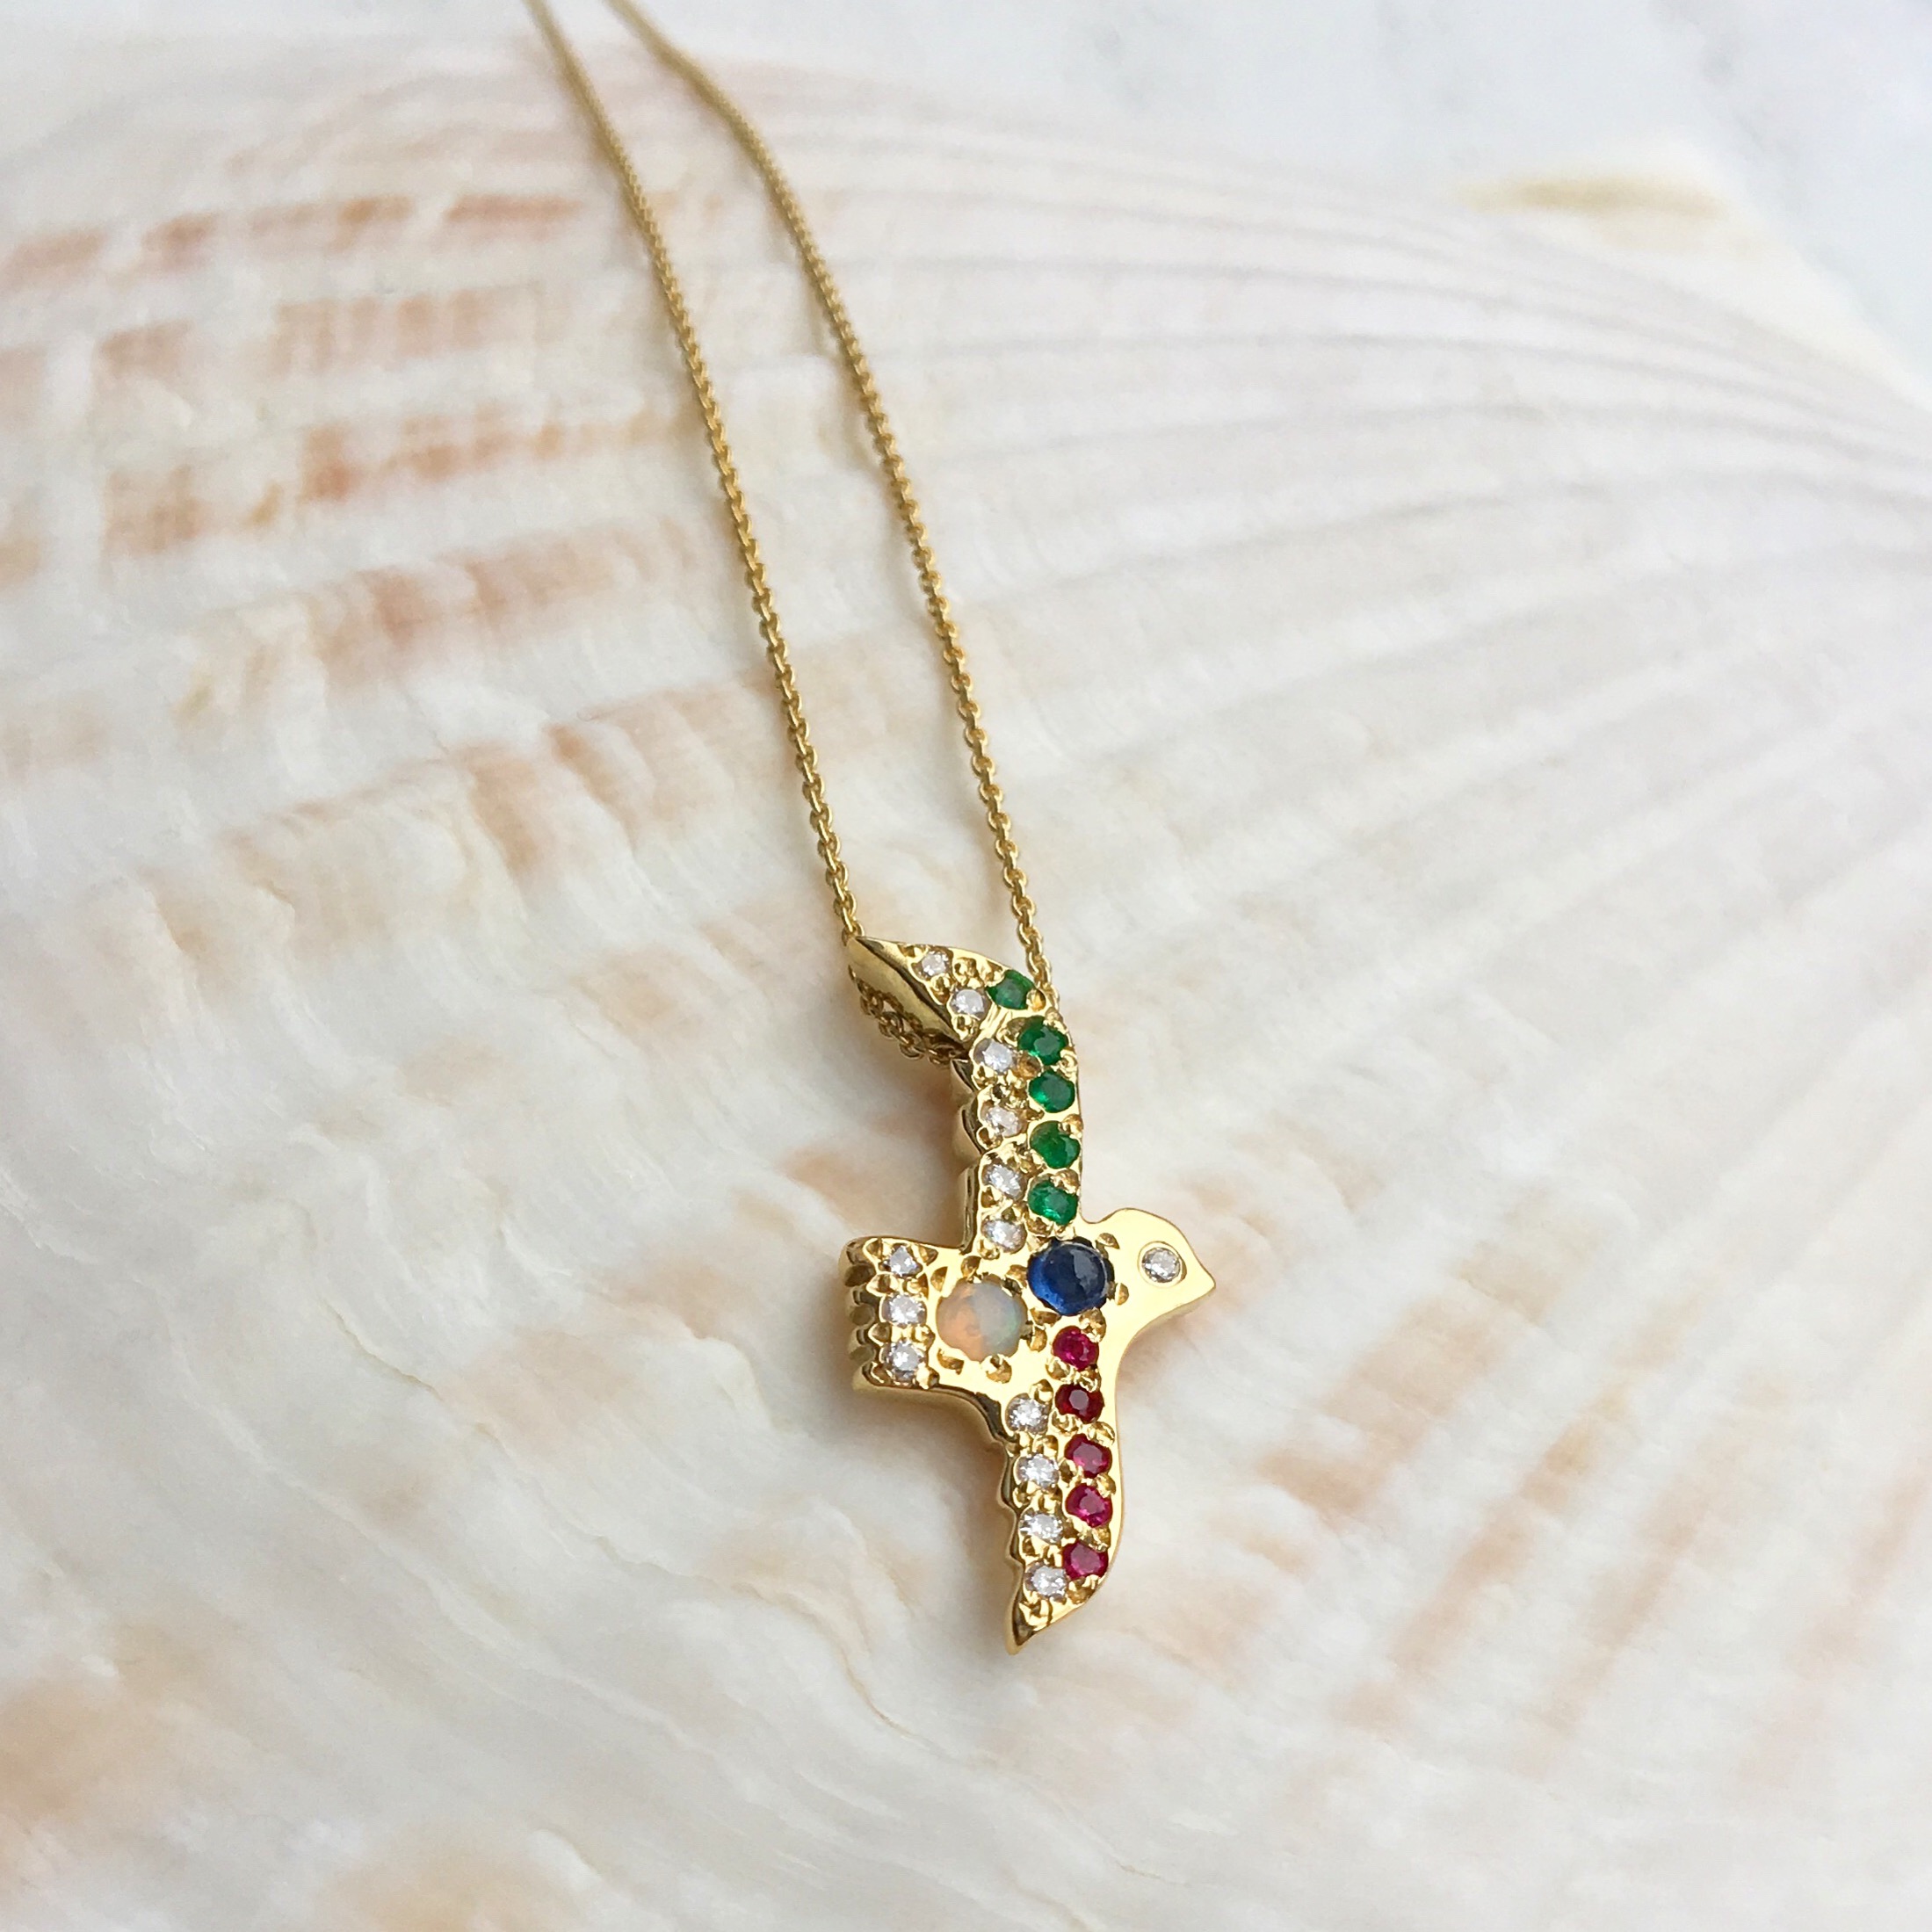 custom handmade flying bird gold necklace with opal and gemstones